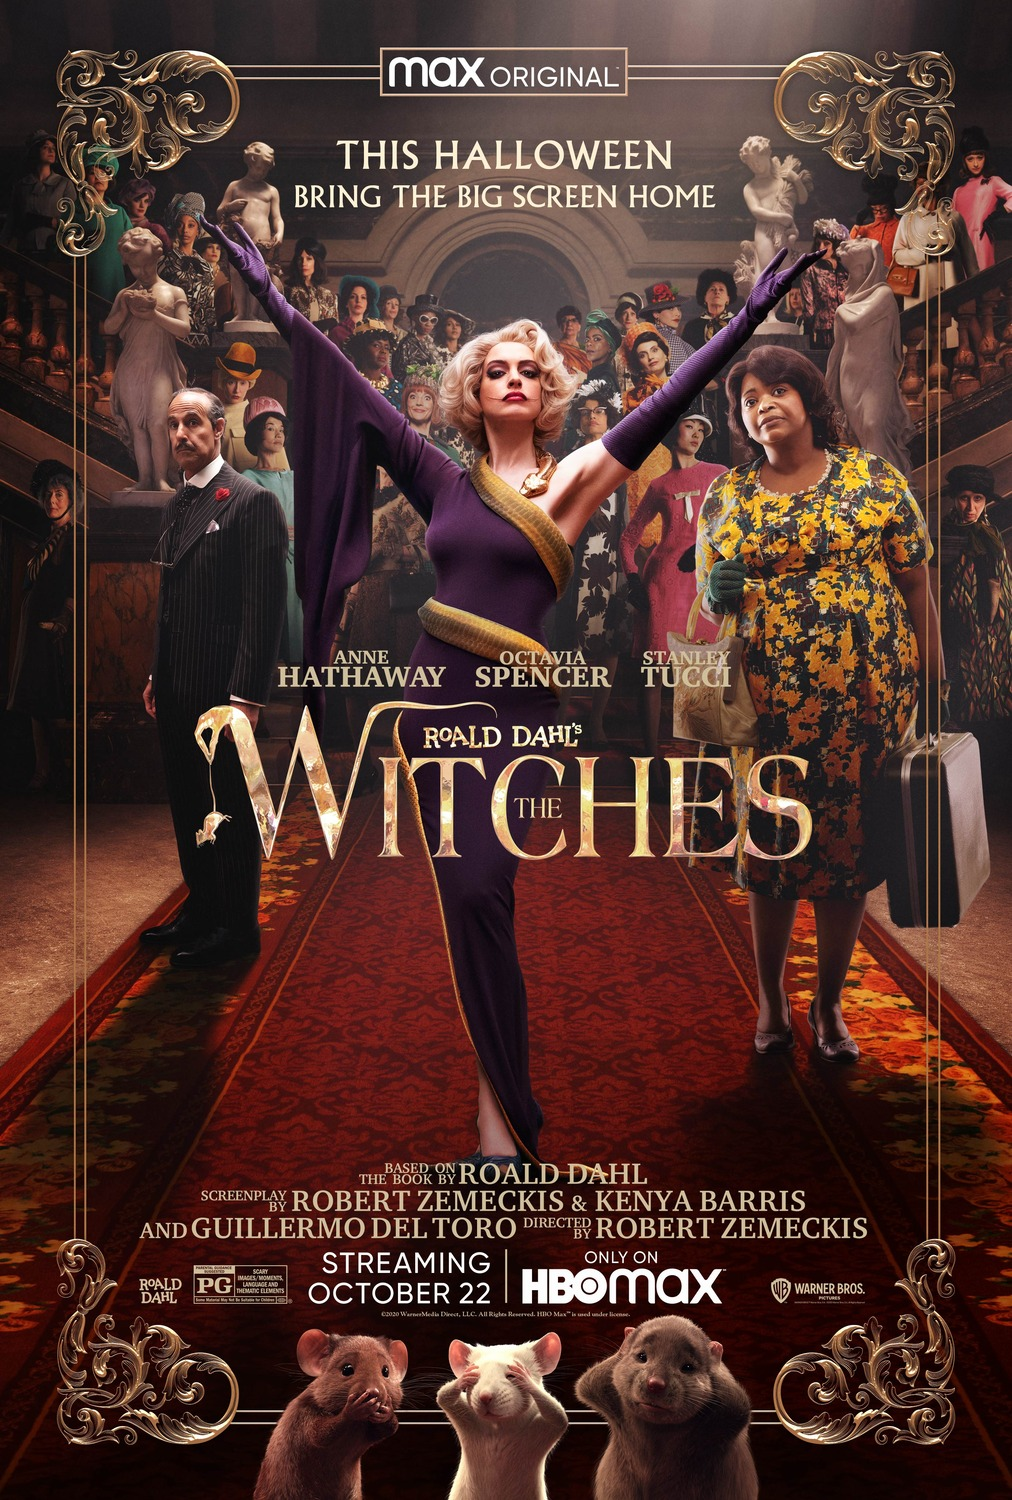 The Witches (2020 film) Warner Bros picture photo